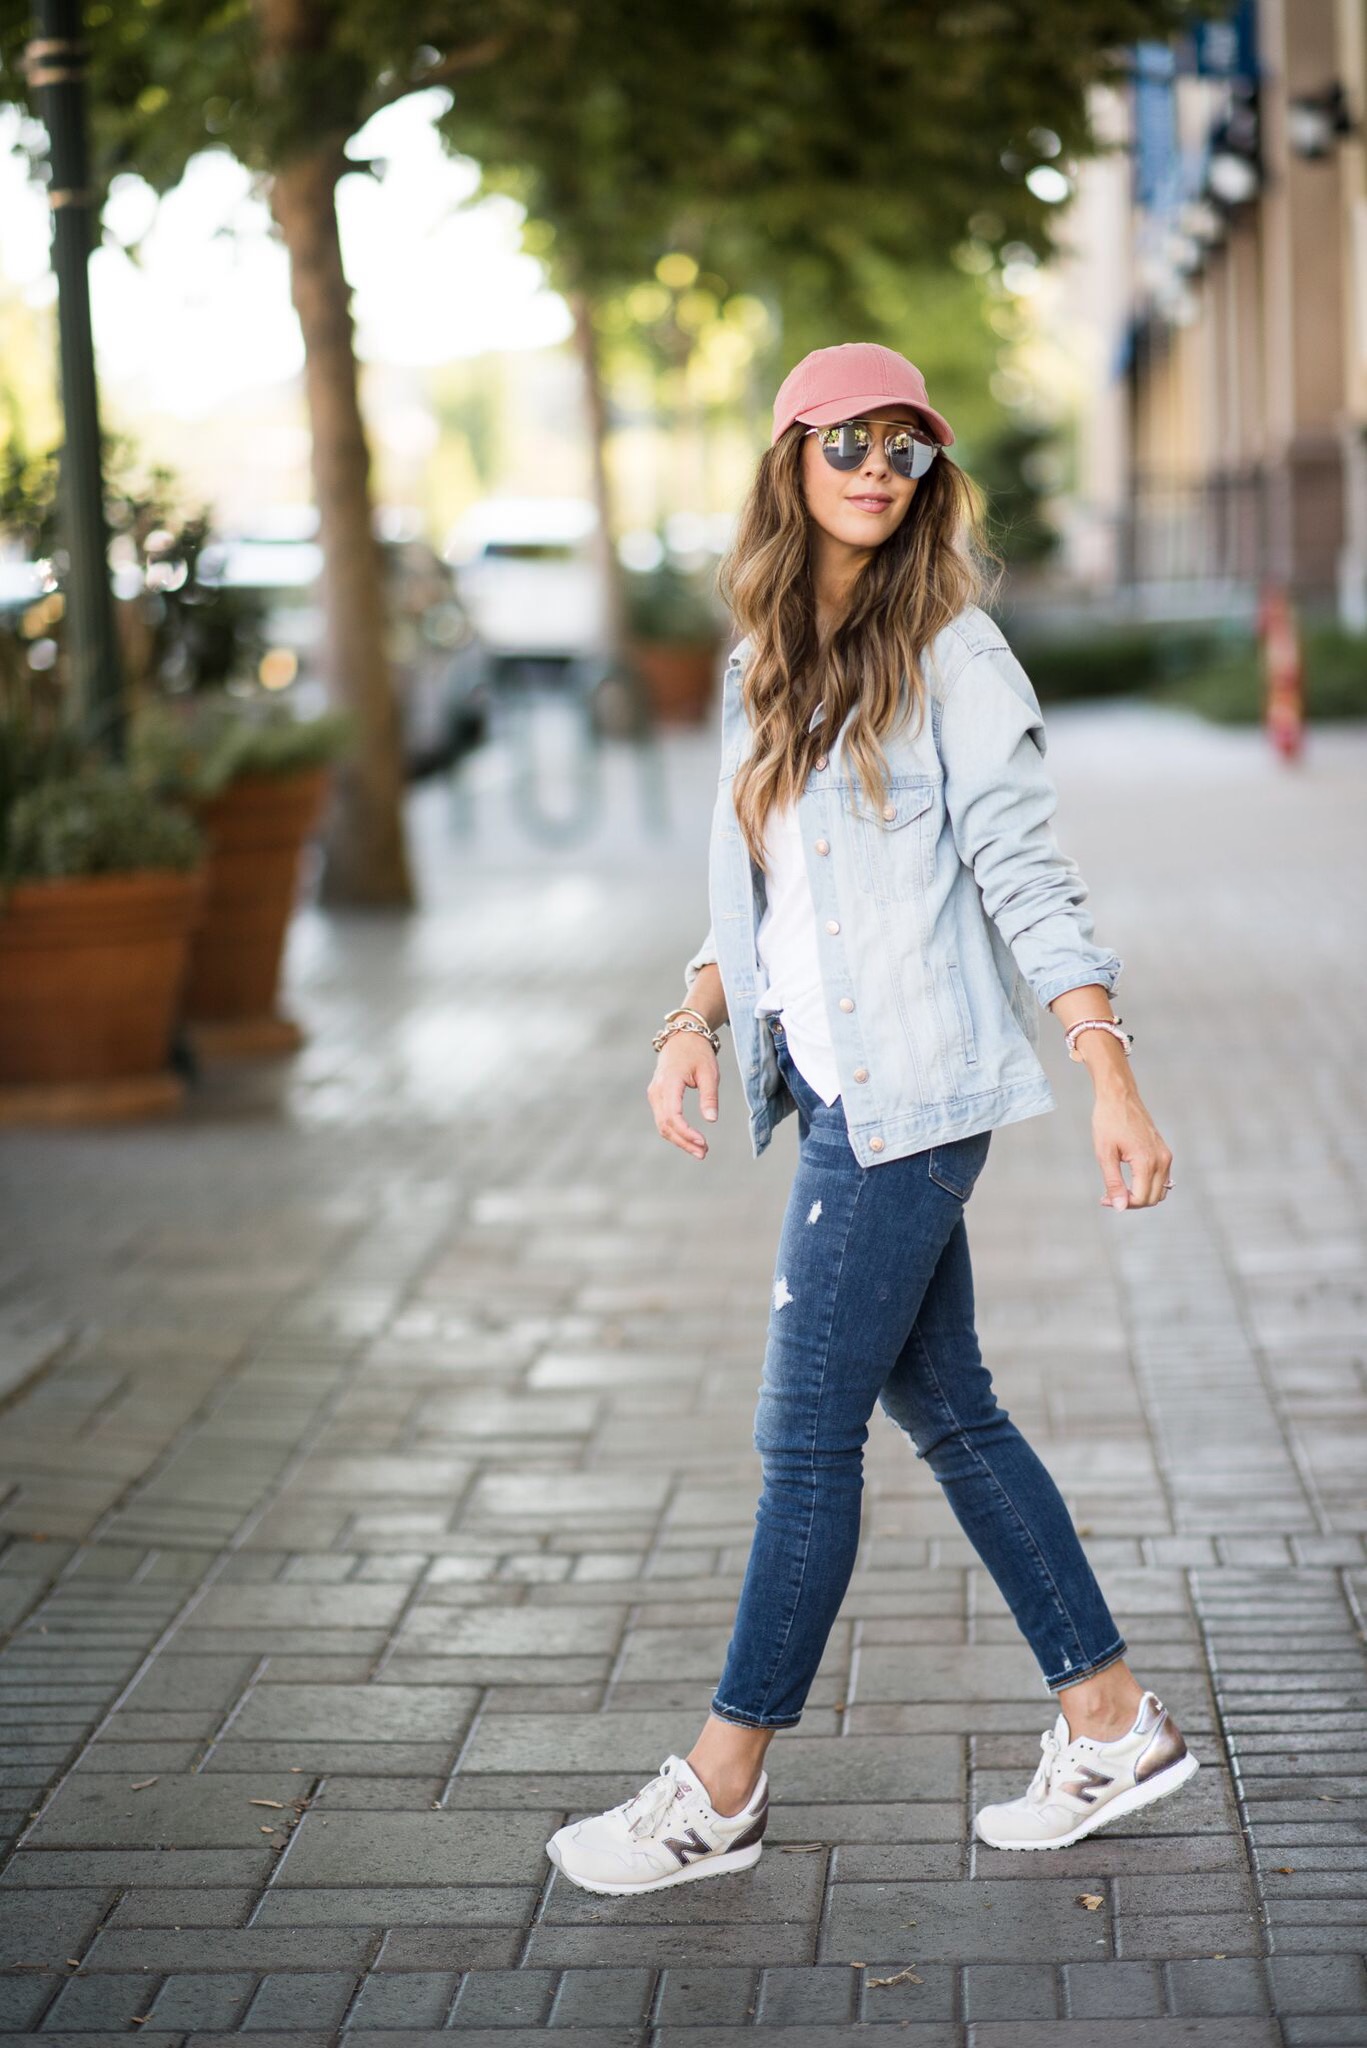 3 tips on putting together a sporty and casual look + Nordstrom